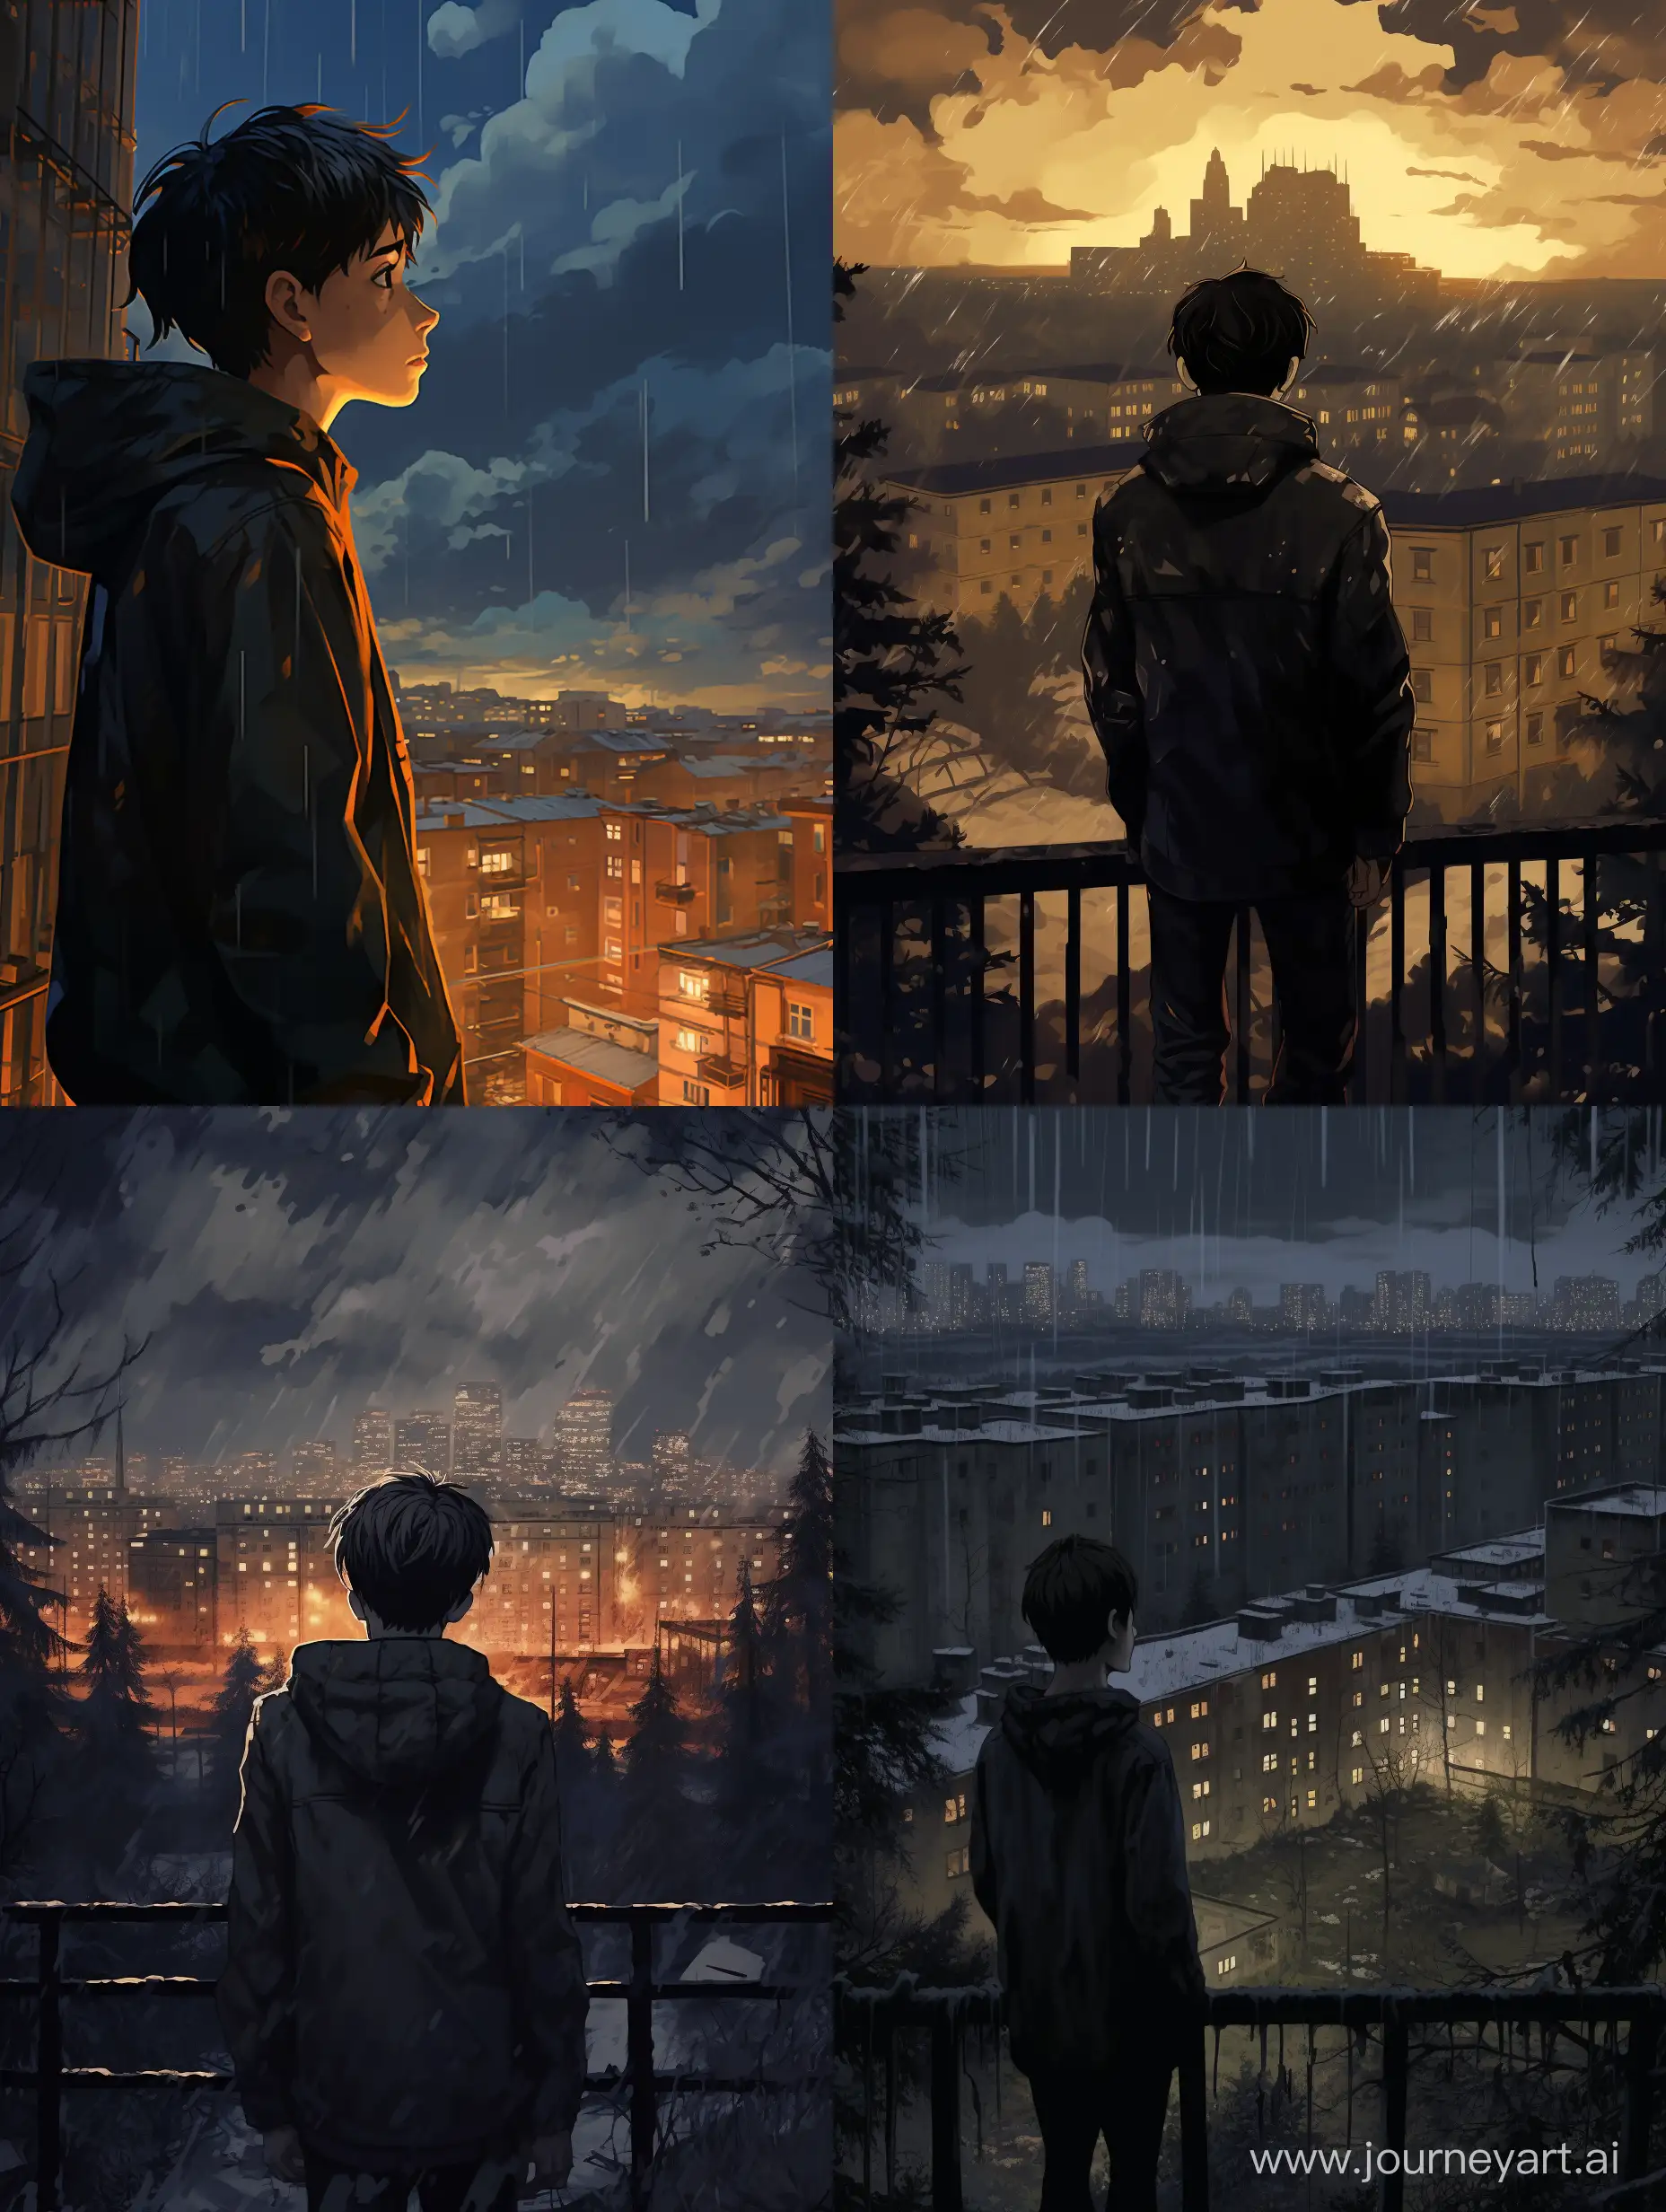 the boy 12 years old, anime style, on the left and right are Russian high-rises houses like in the Soviet Union, standing back, anime, dark grey skies, poverty, high-detailed, it's raining and snowing, sad atmosphere, night.